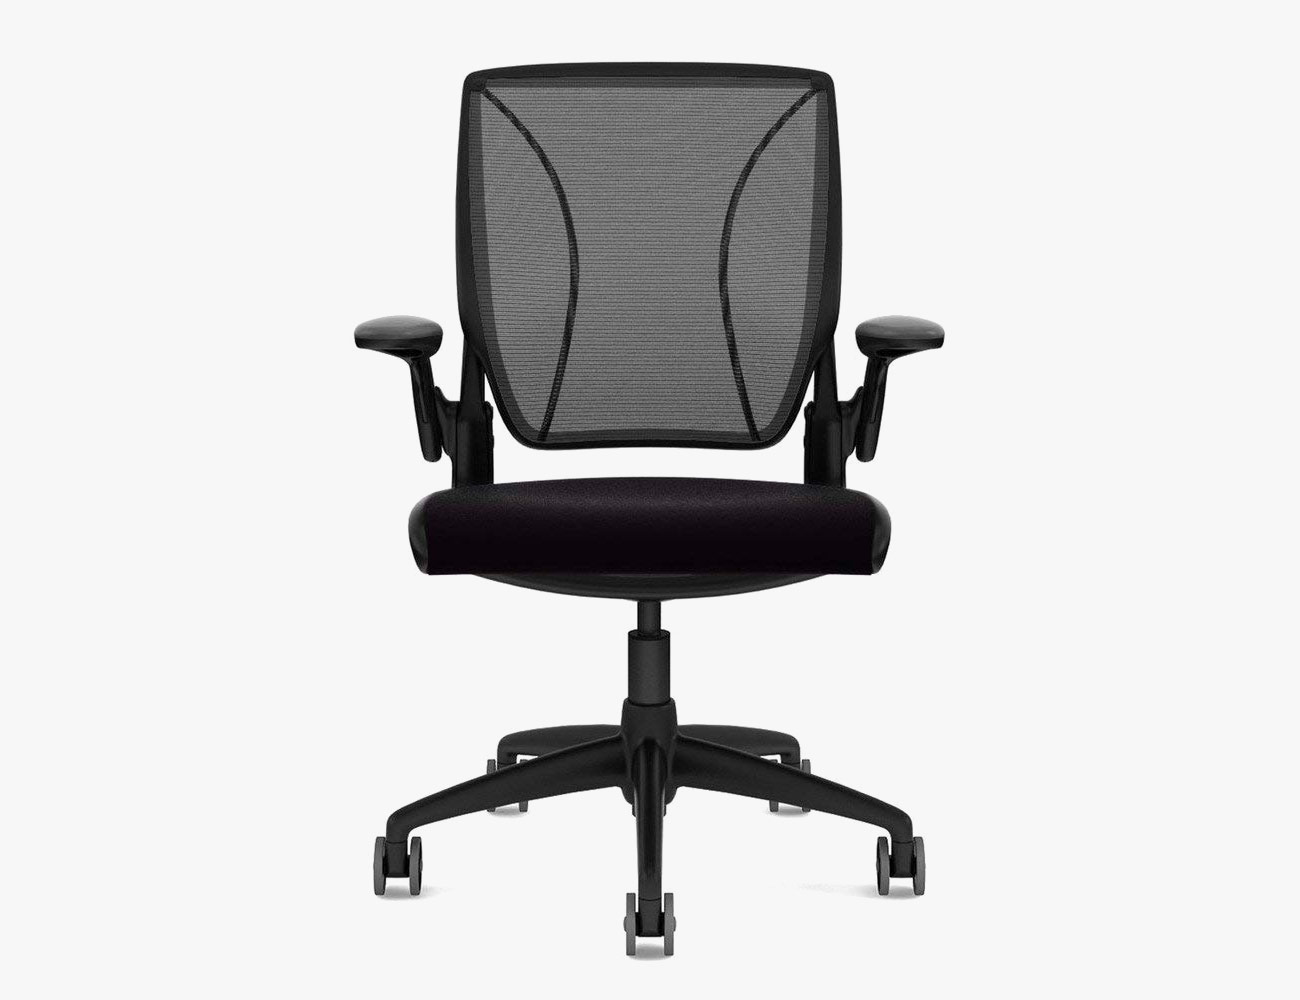 Best Office Chair for Small Work Spaces: Humanscale Diffrient World Chair